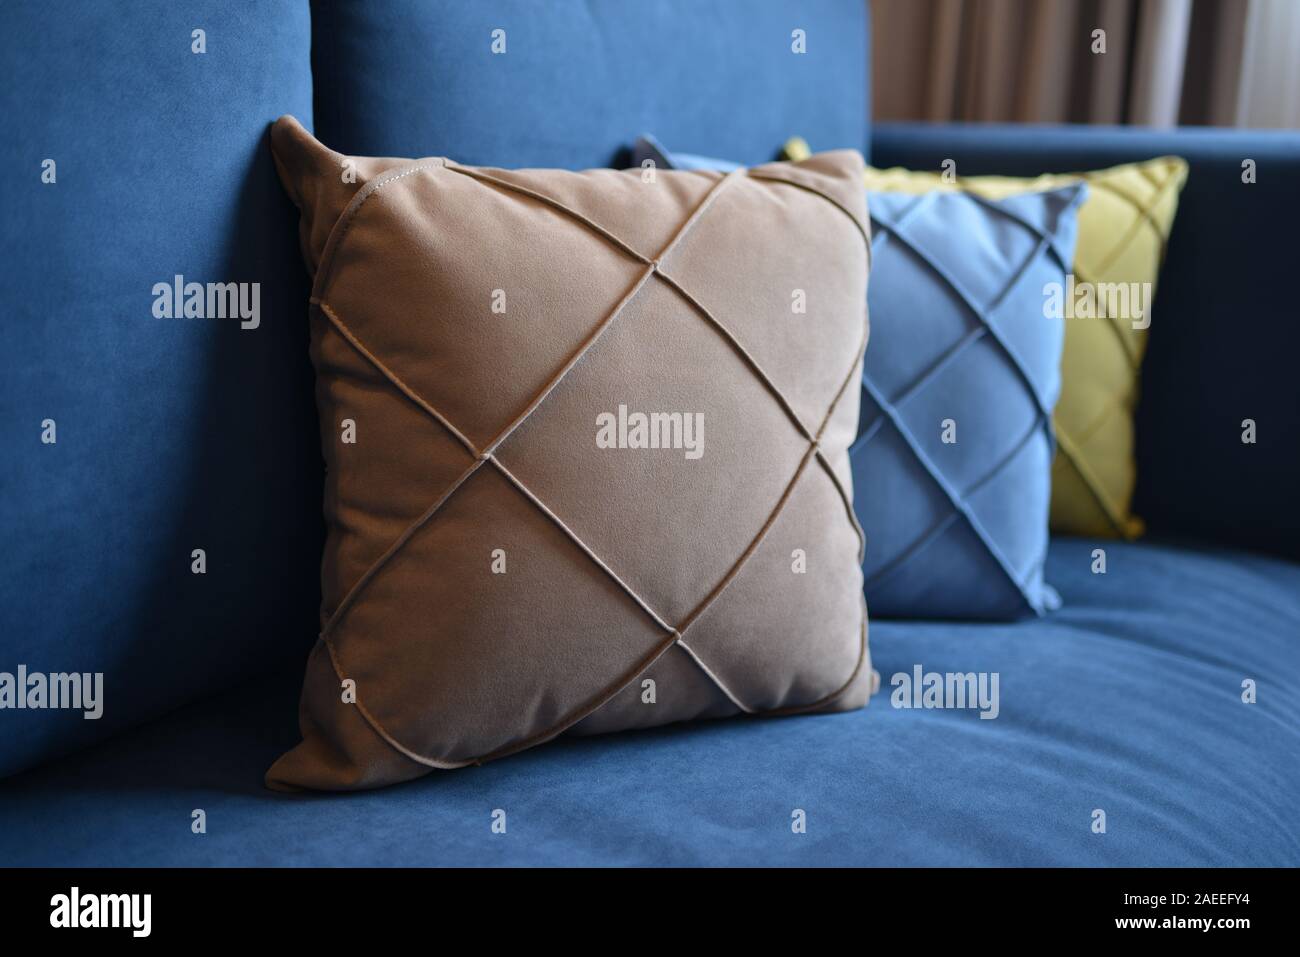 Brown Blue And Yellow Pillows On The Couch Stock Photo 335922024